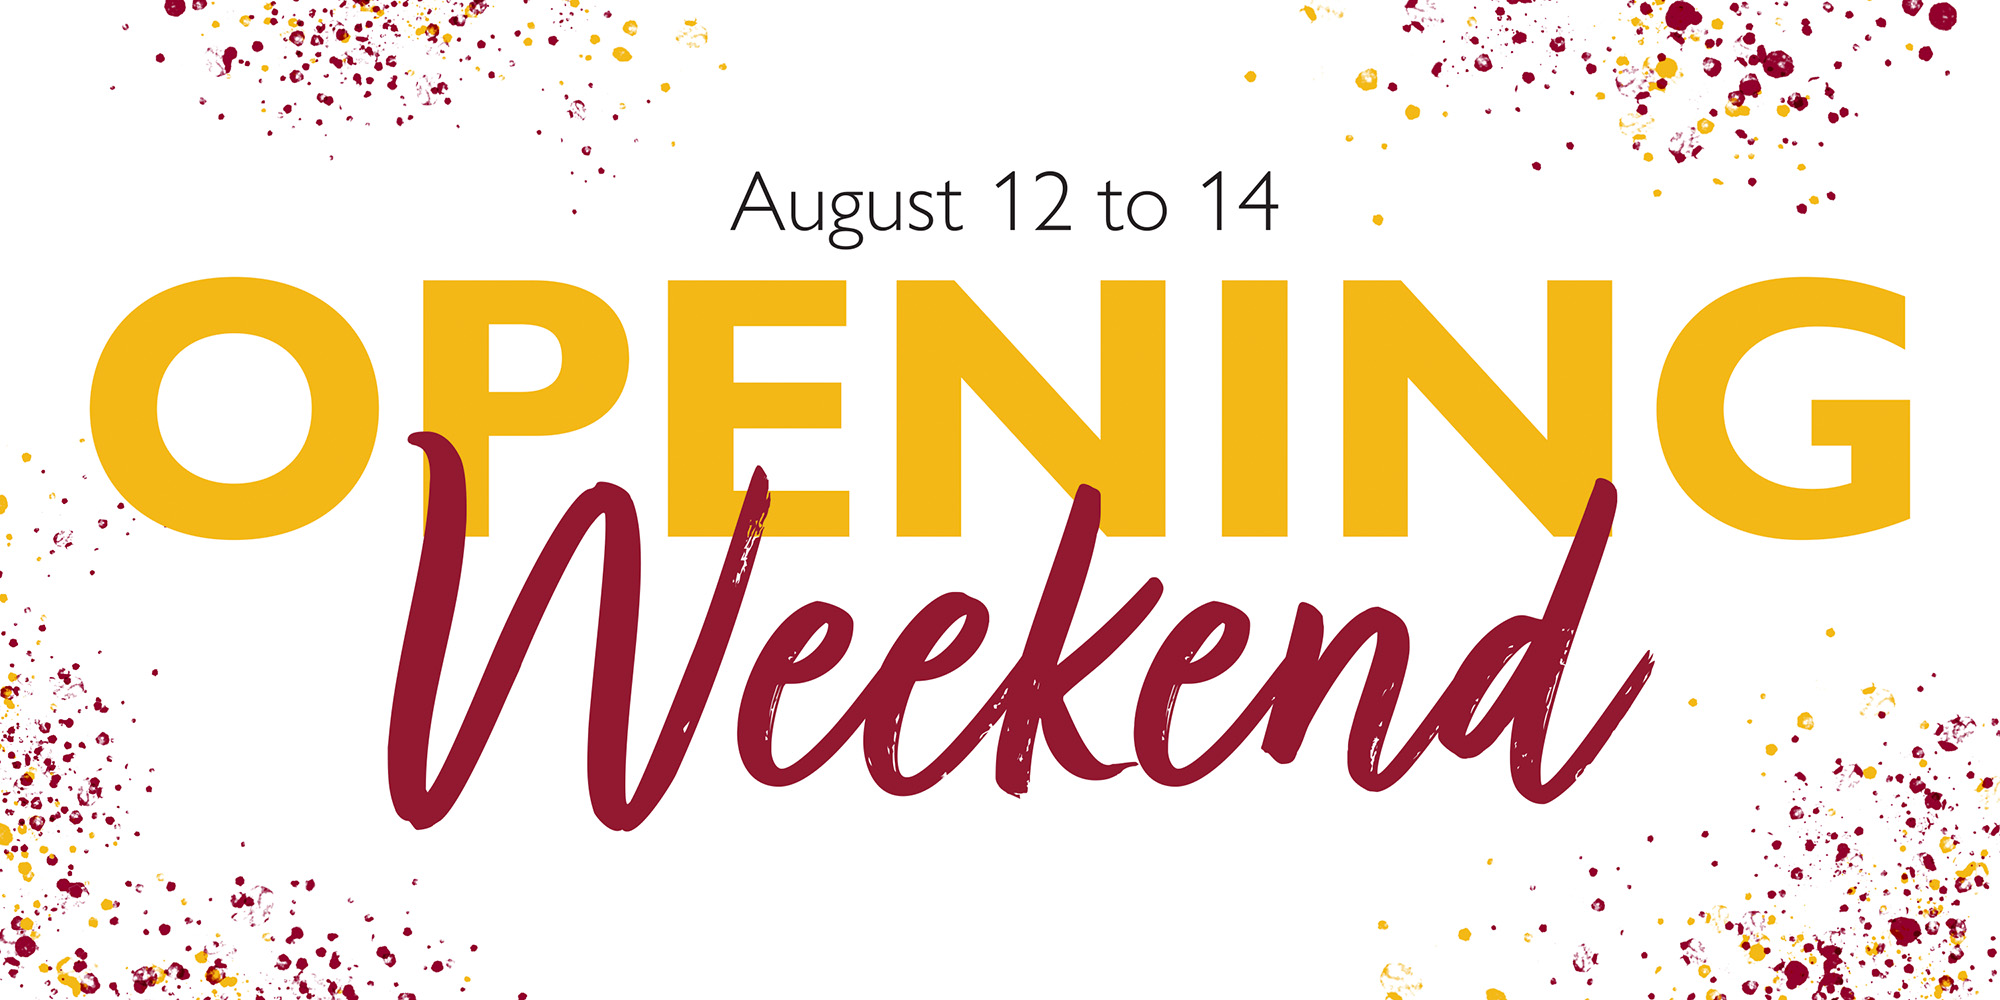 Opening Weekend 2022 - August 12 to 14